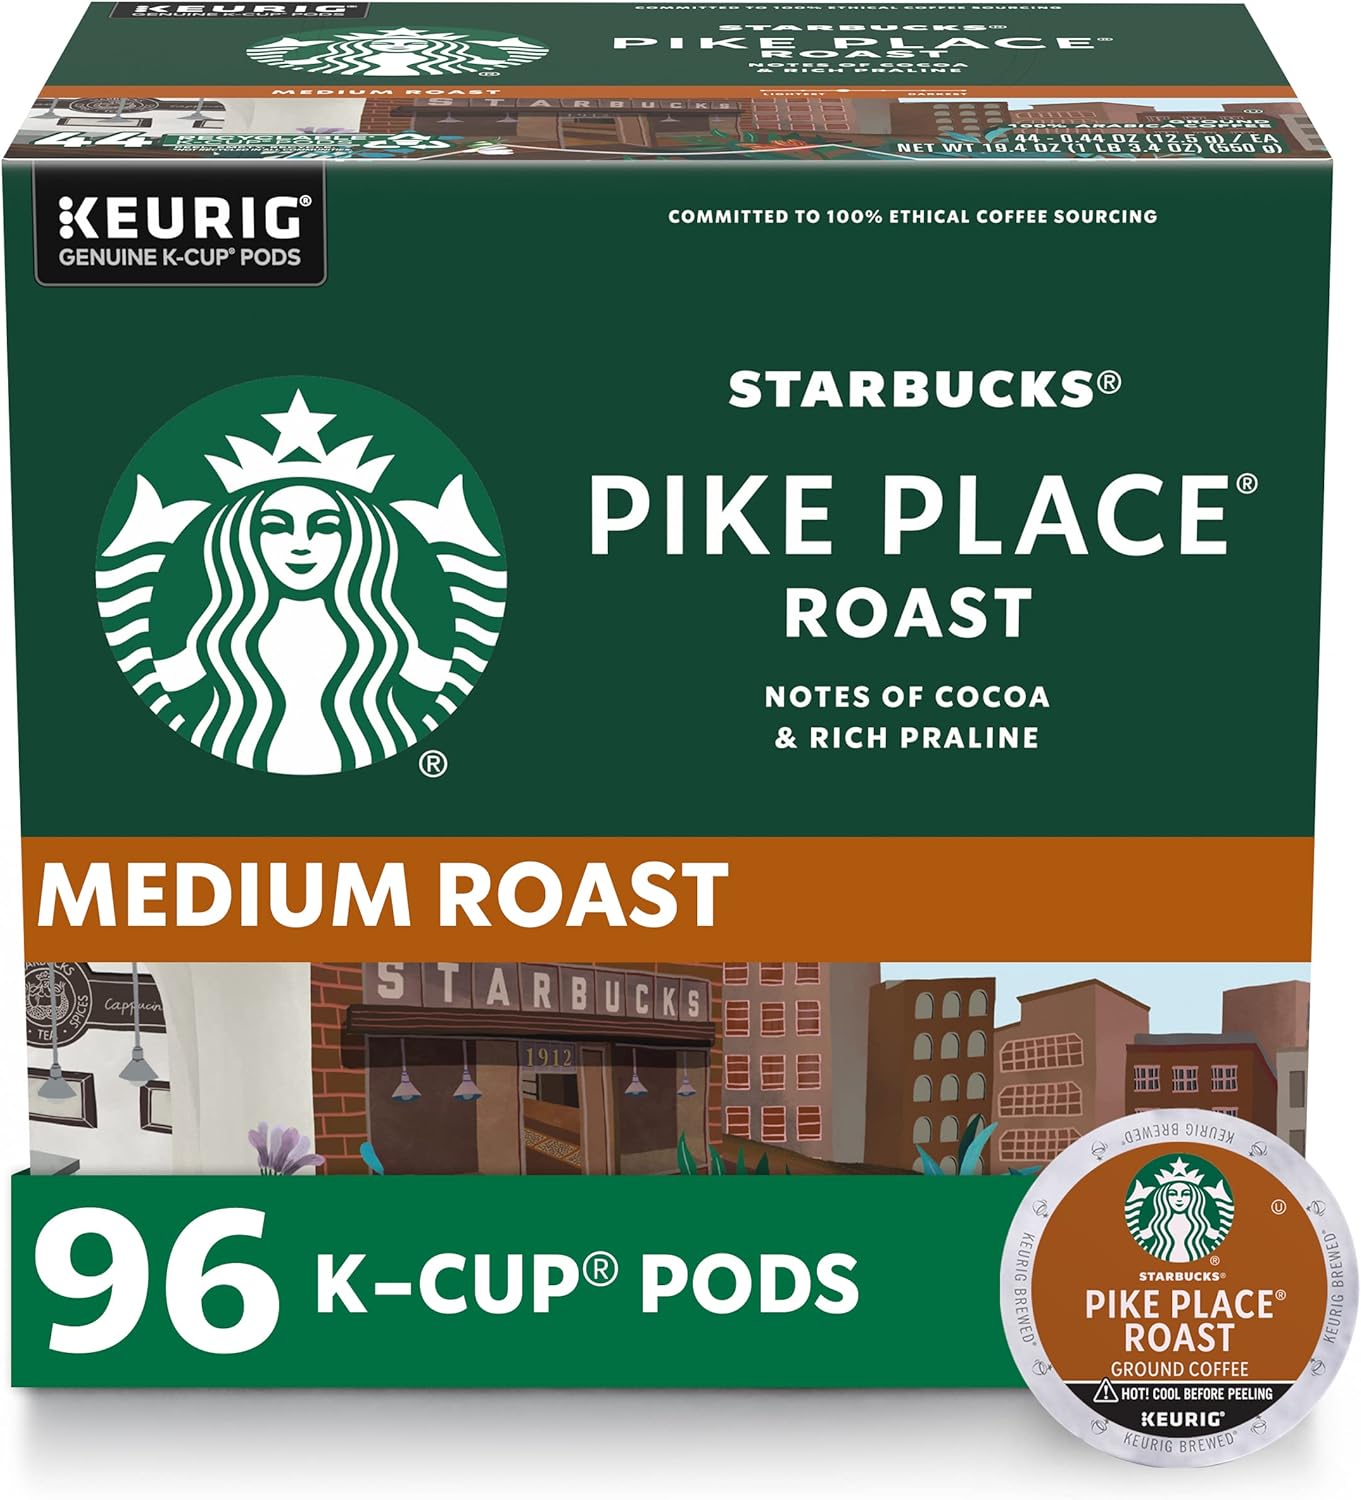 Starbucks K-Cup Coffee Pods—Medium Roast Coffee—Pike Place Roast for Keurig Brewers—100% Arabica—4 boxes (96 pods total)